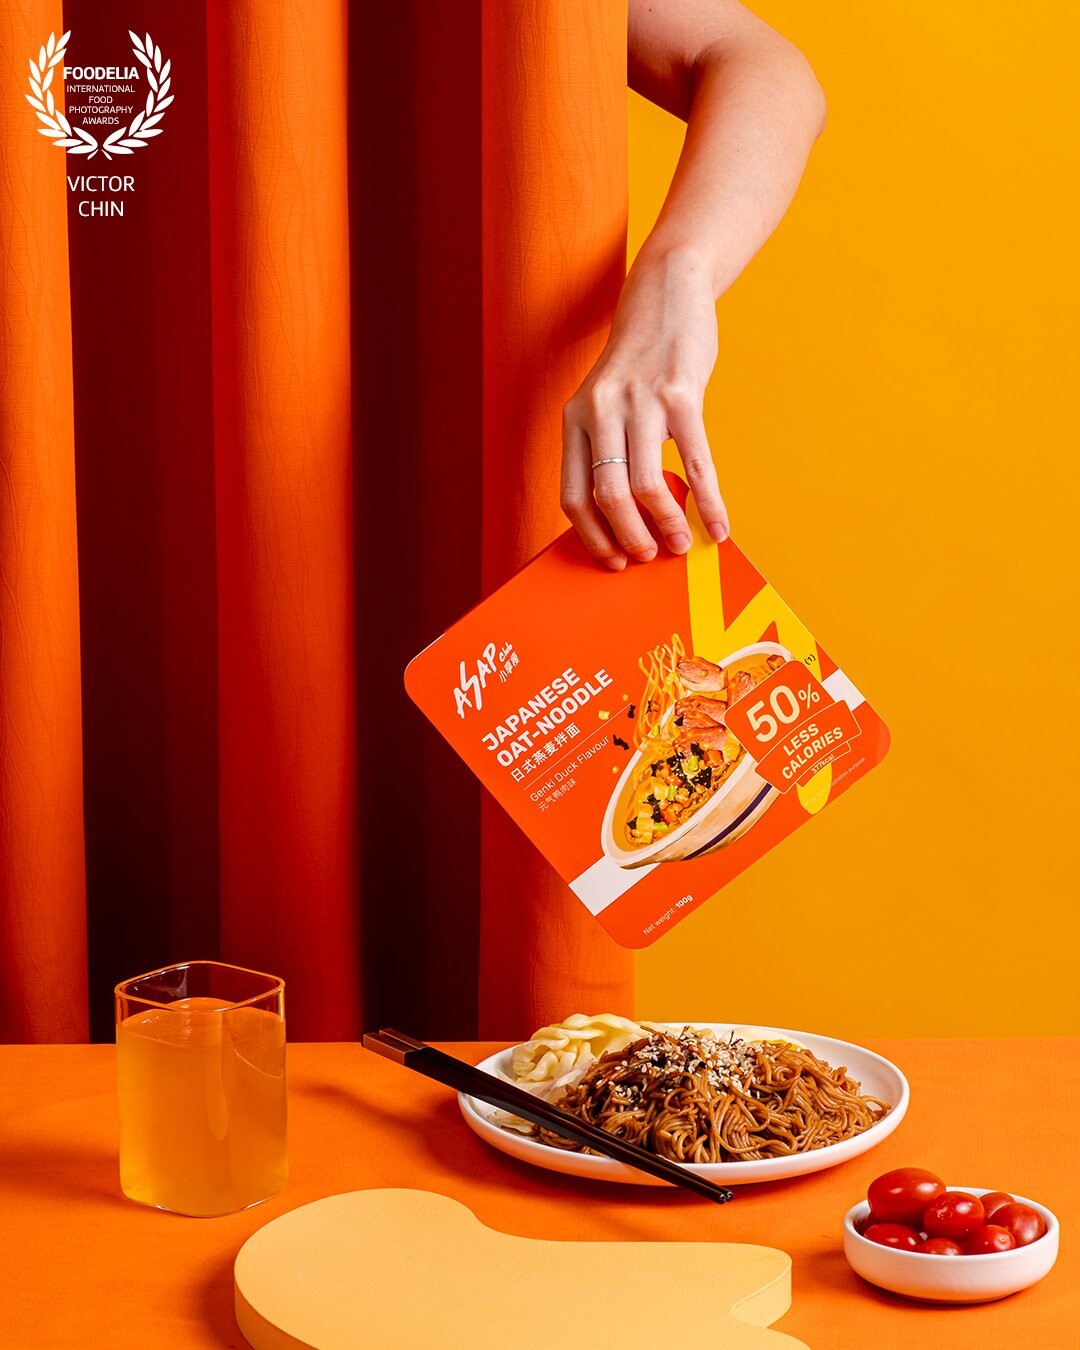 Shot this healthy diet instant oat noodle for a local brand. The idea is to match the ambience with the product color. 3 lights setup to achieve this result.